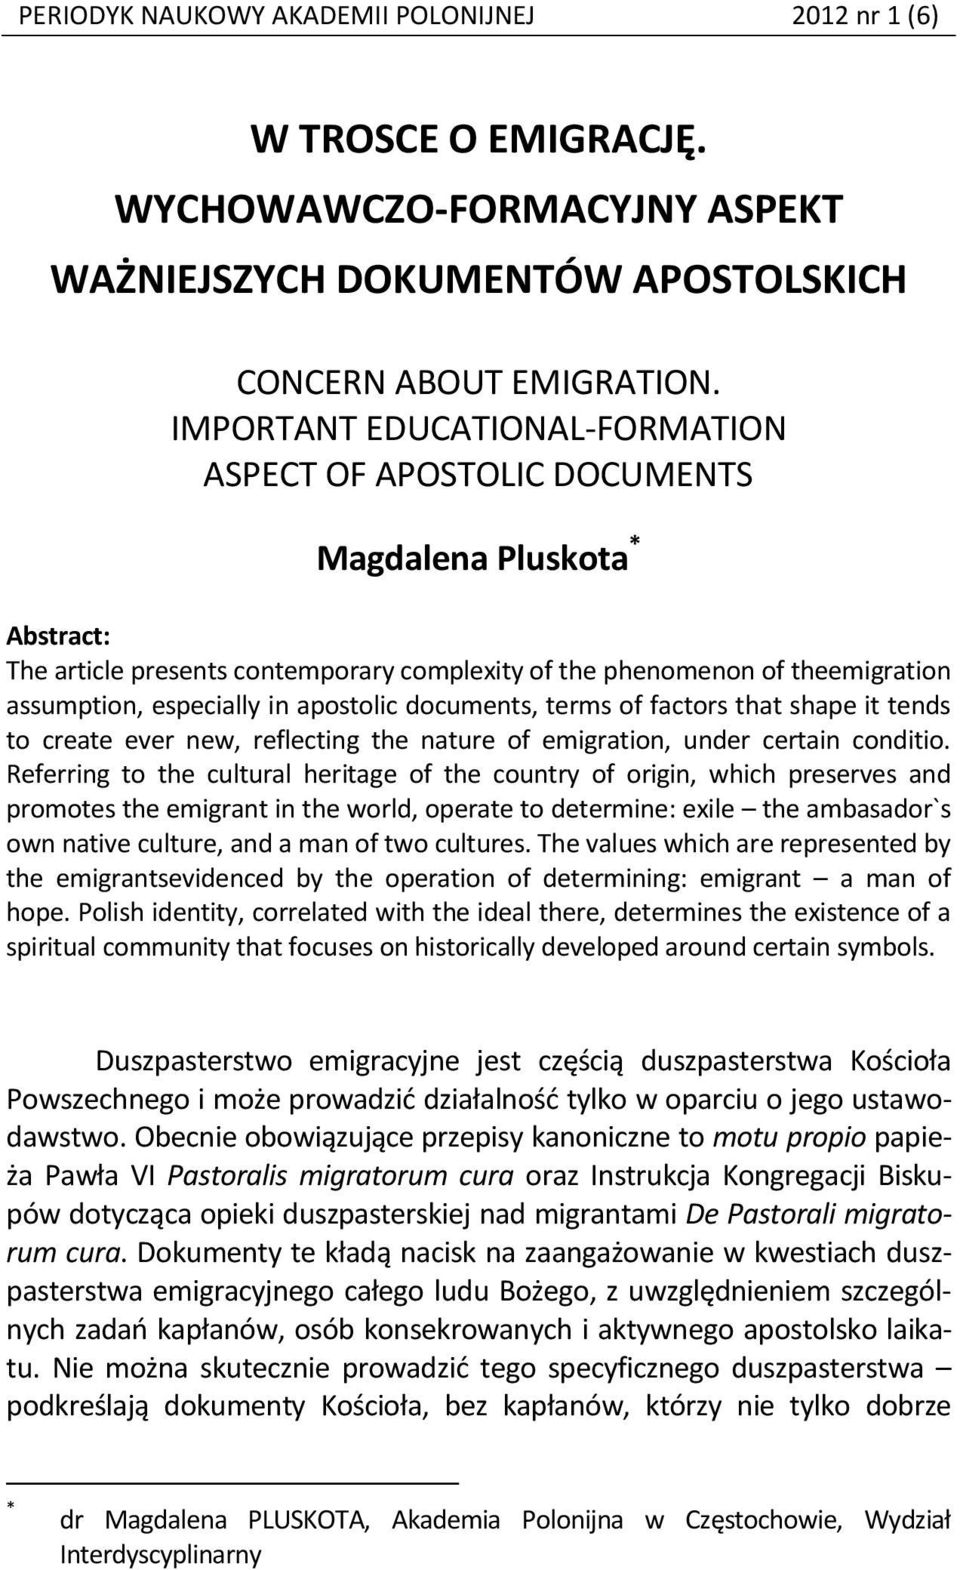 apostolic documents, terms of factors that shape it tends to create ever new, reflecting the nature of emigration, under certain conditio.